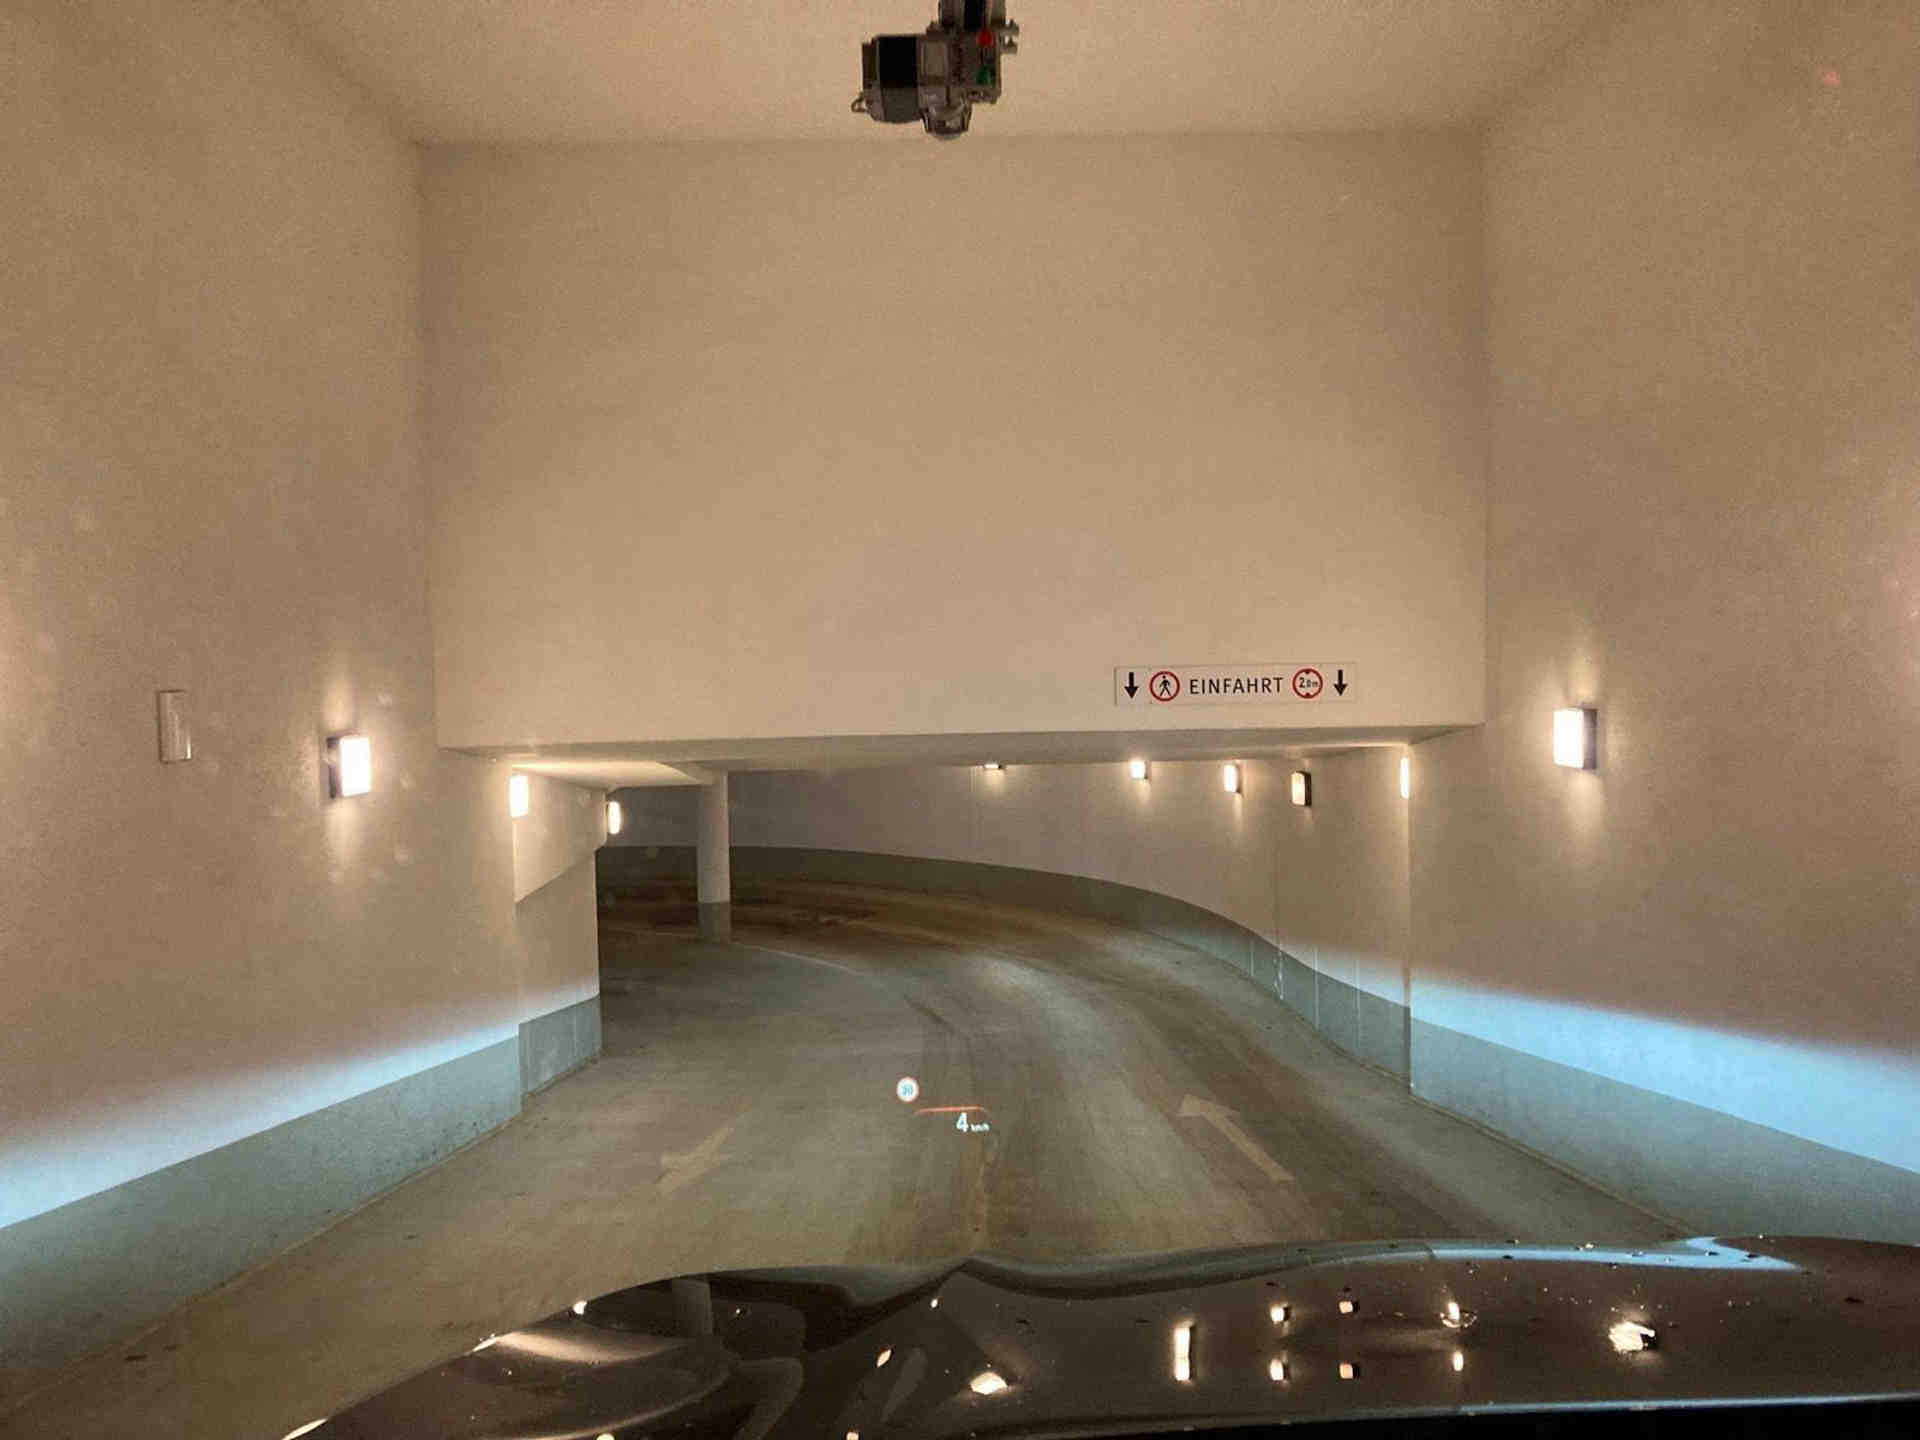 New underground parking: large, safe & perfectly located - Chausseestraße, 10115 Berlin - Photo 3 of 4